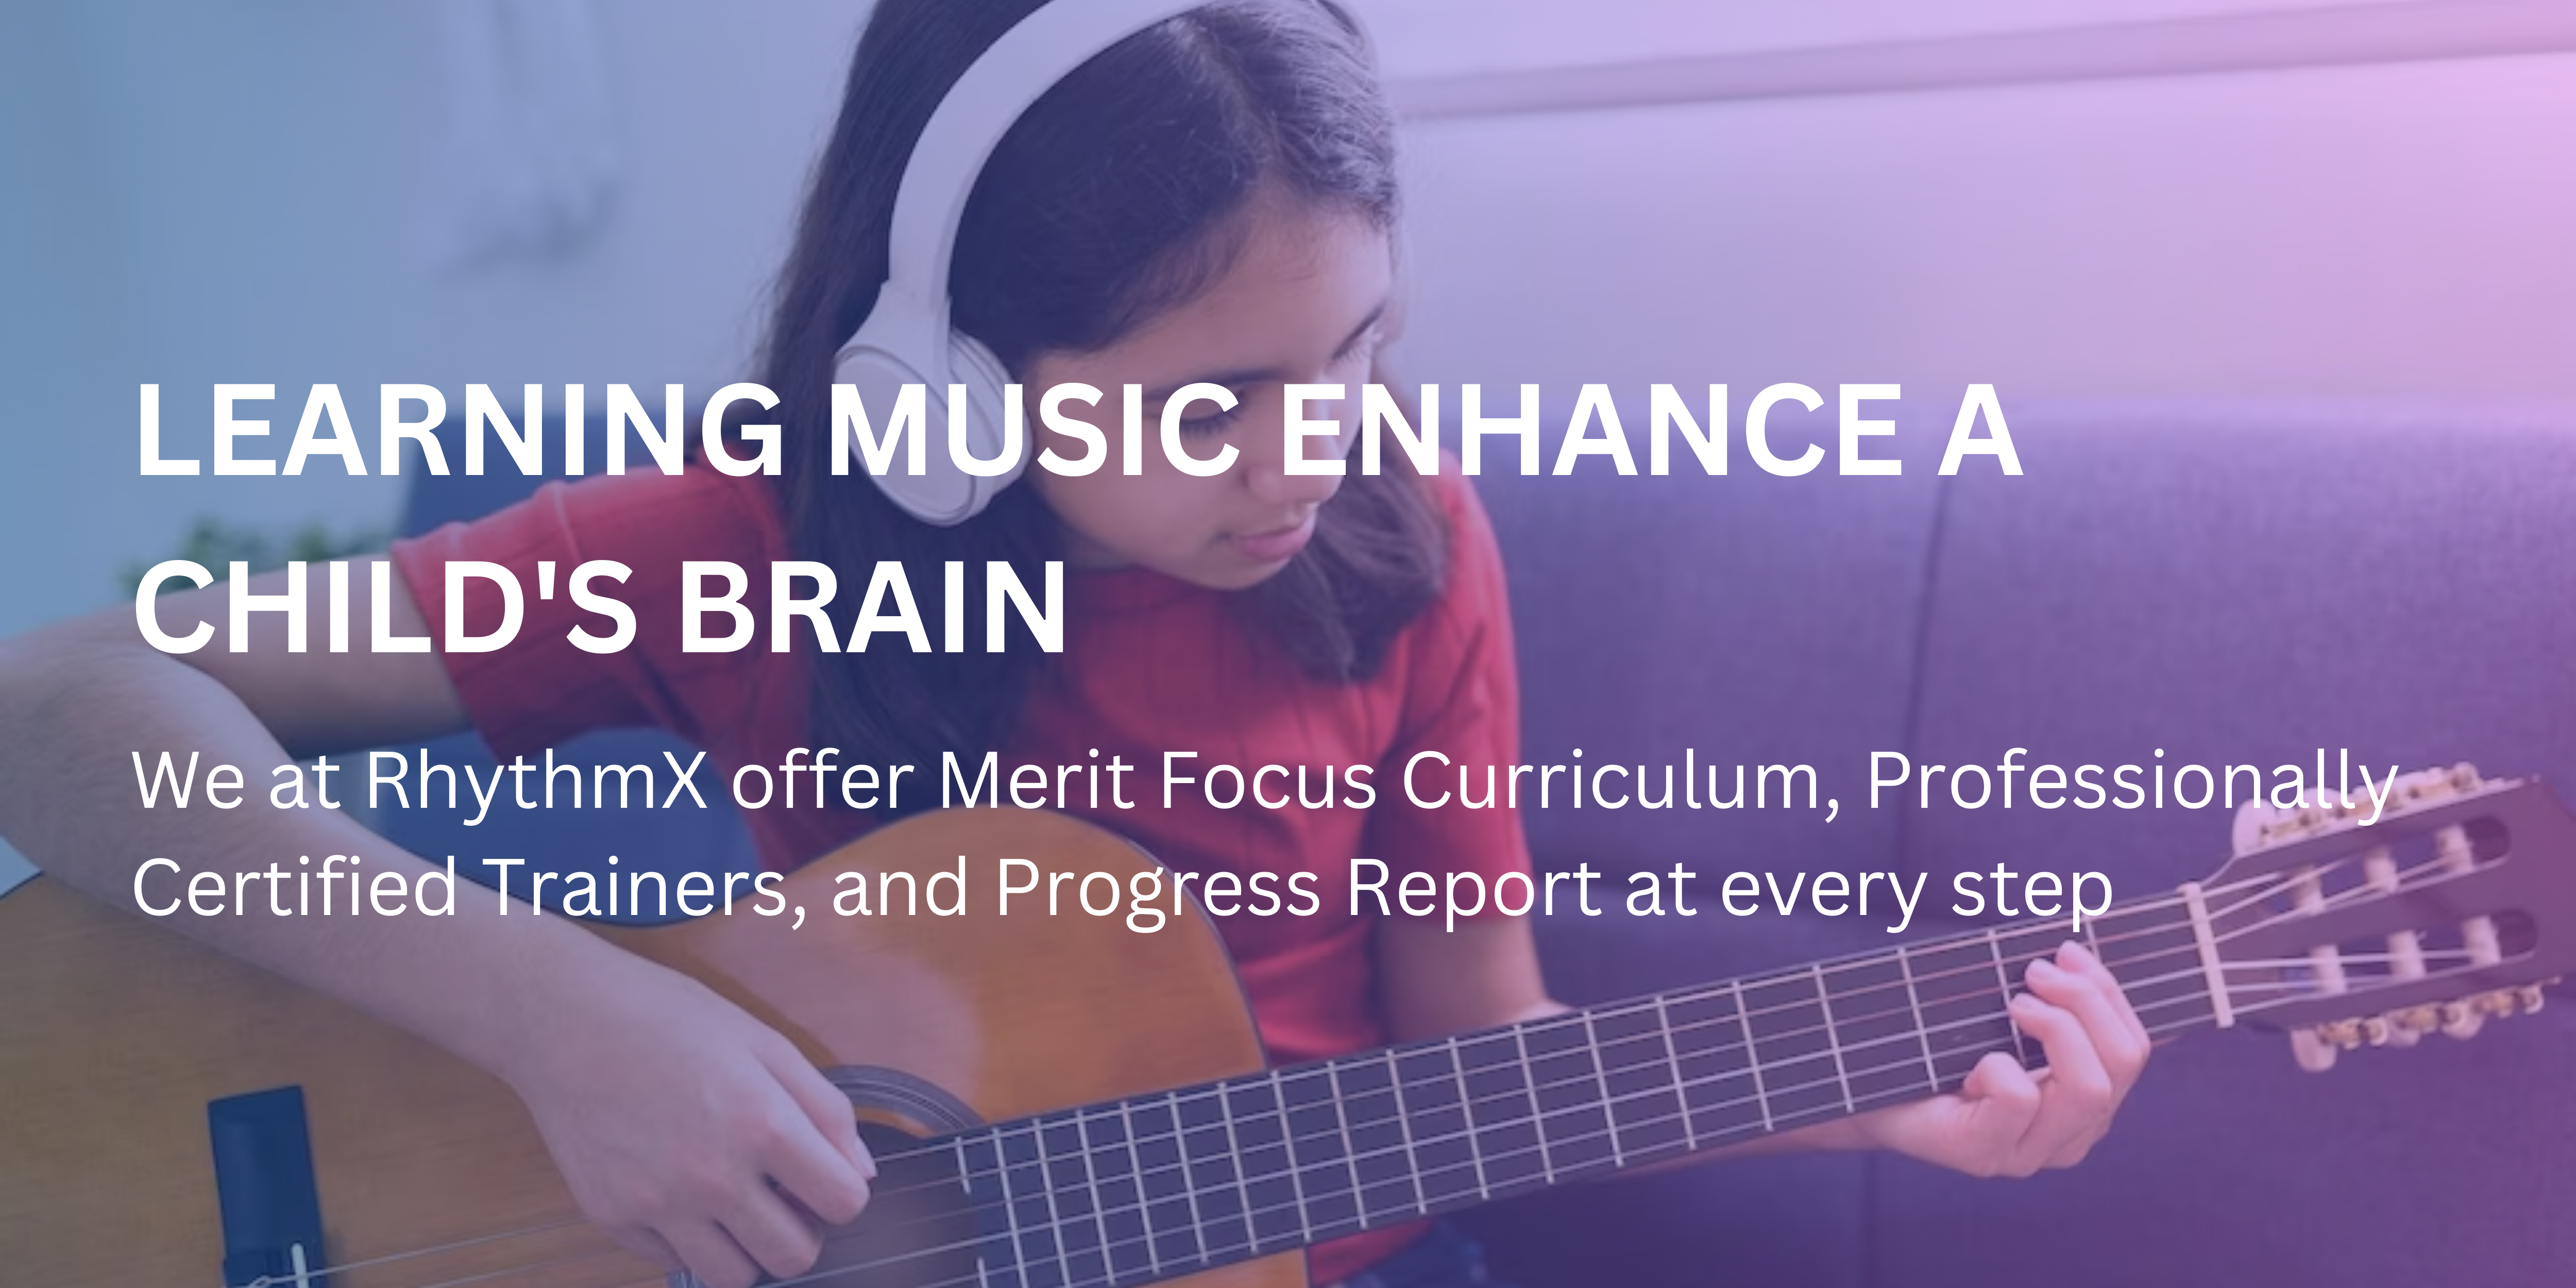 LEARNING MUSIC ENHANCE A CHILD'S BRAIN